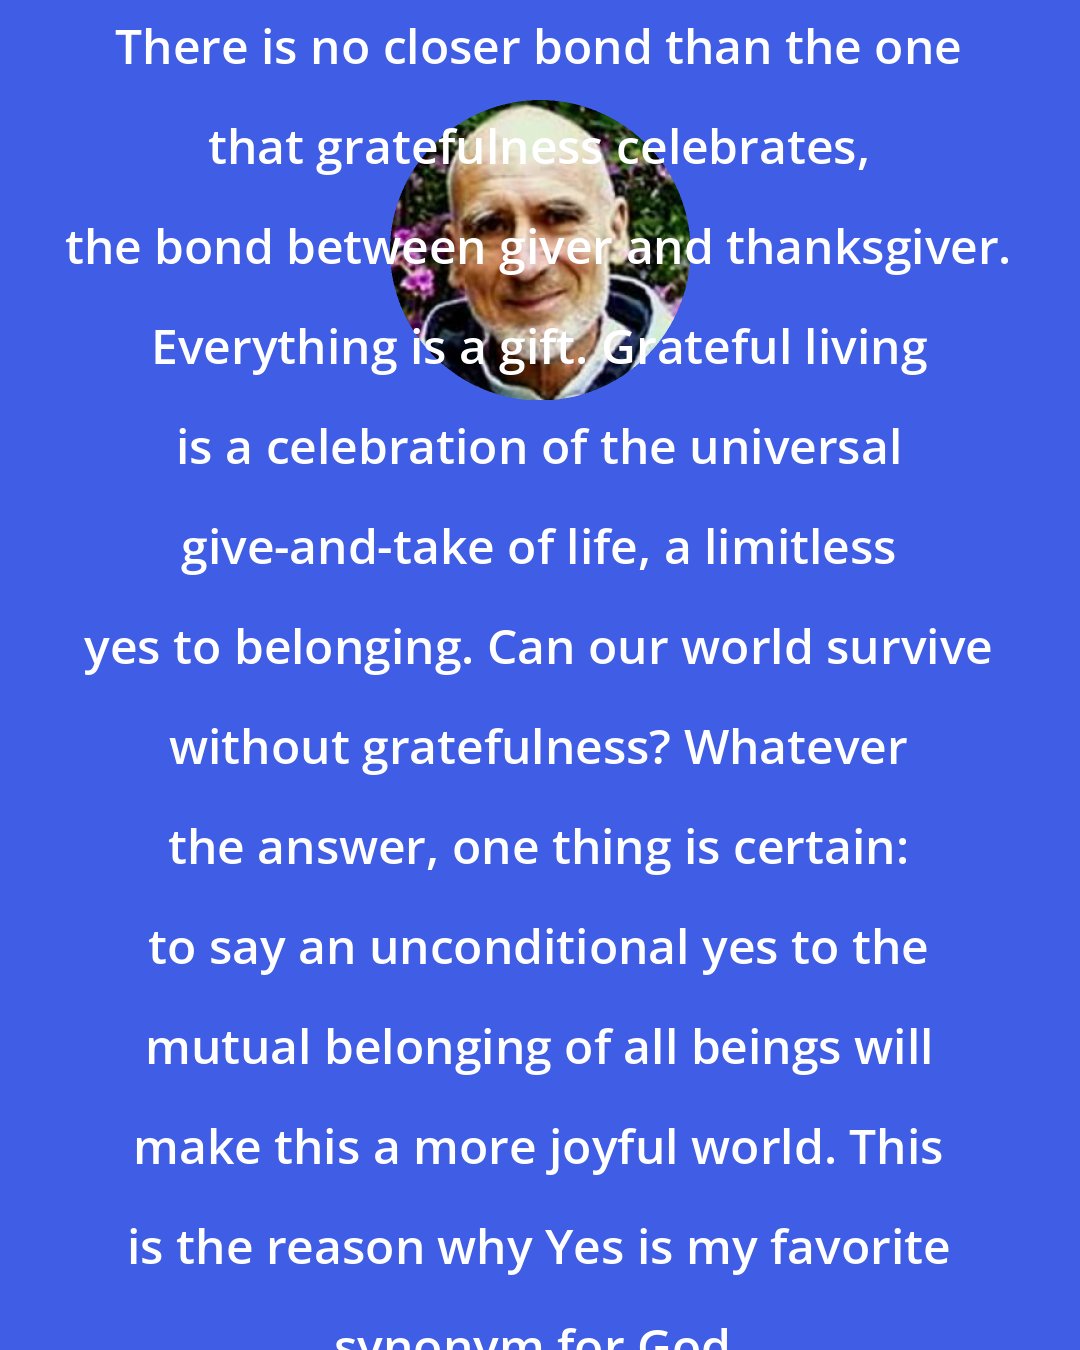 David Steindl-Rast: There is no closer bond than the one that gratefulness celebrates, the bond between giver and thanksgiver. Everything is a gift. Grateful living is a celebration of the universal give-and-take of life, a limitless yes to belonging. Can our world survive without gratefulness? Whatever the answer, one thing is certain: to say an unconditional yes to the mutual belonging of all beings will make this a more joyful world. This is the reason why Yes is my favorite synonym for God.